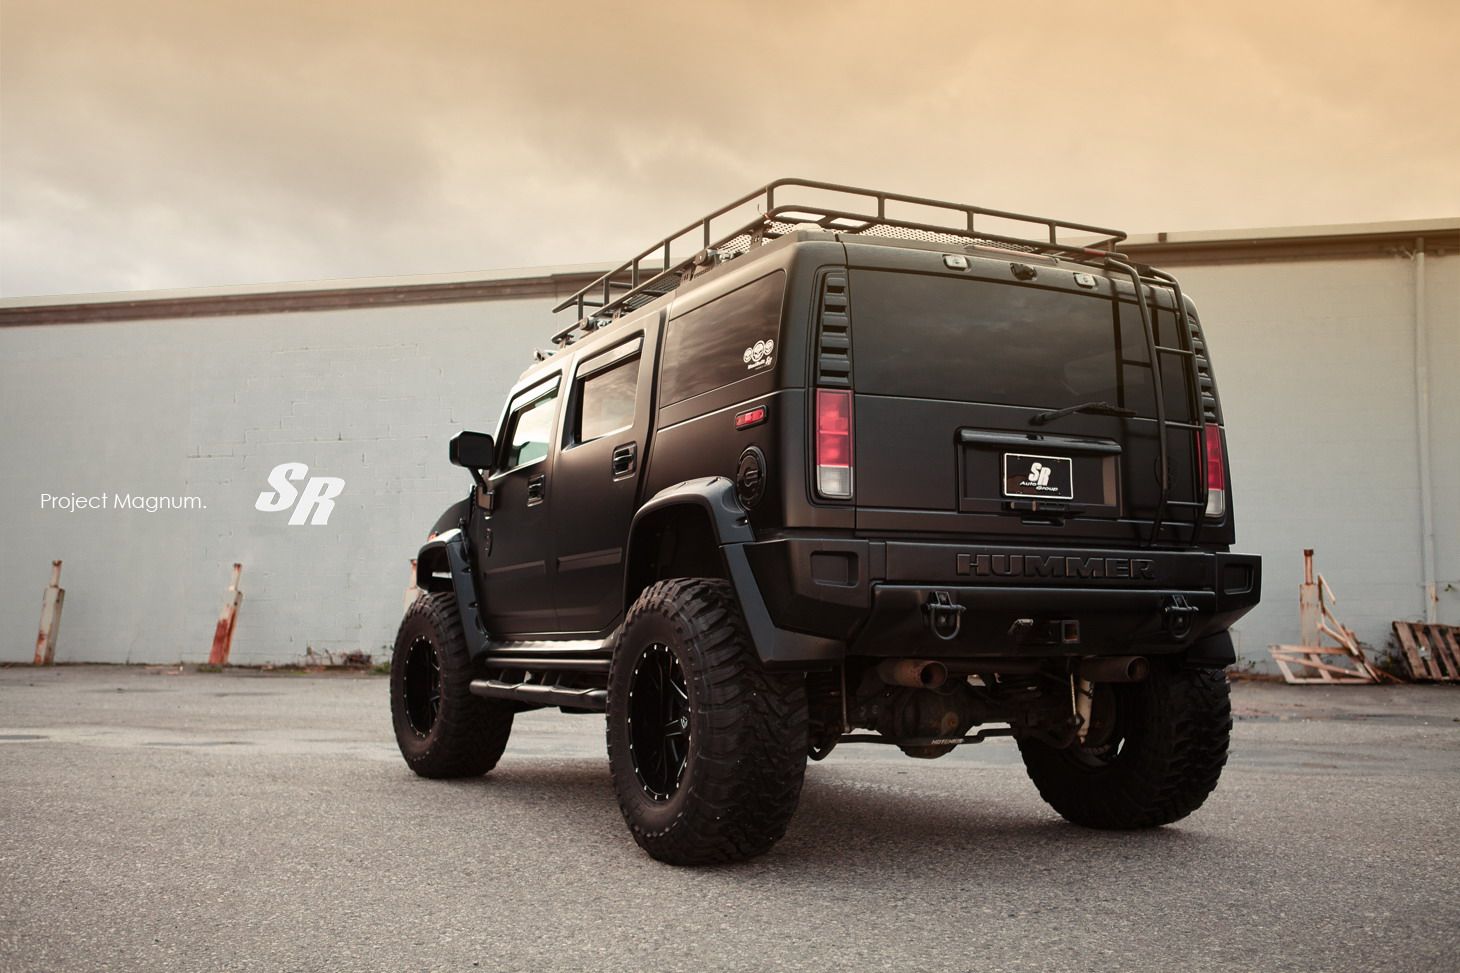 2012 Hummer H2 Project Magnum by SR Auto Group